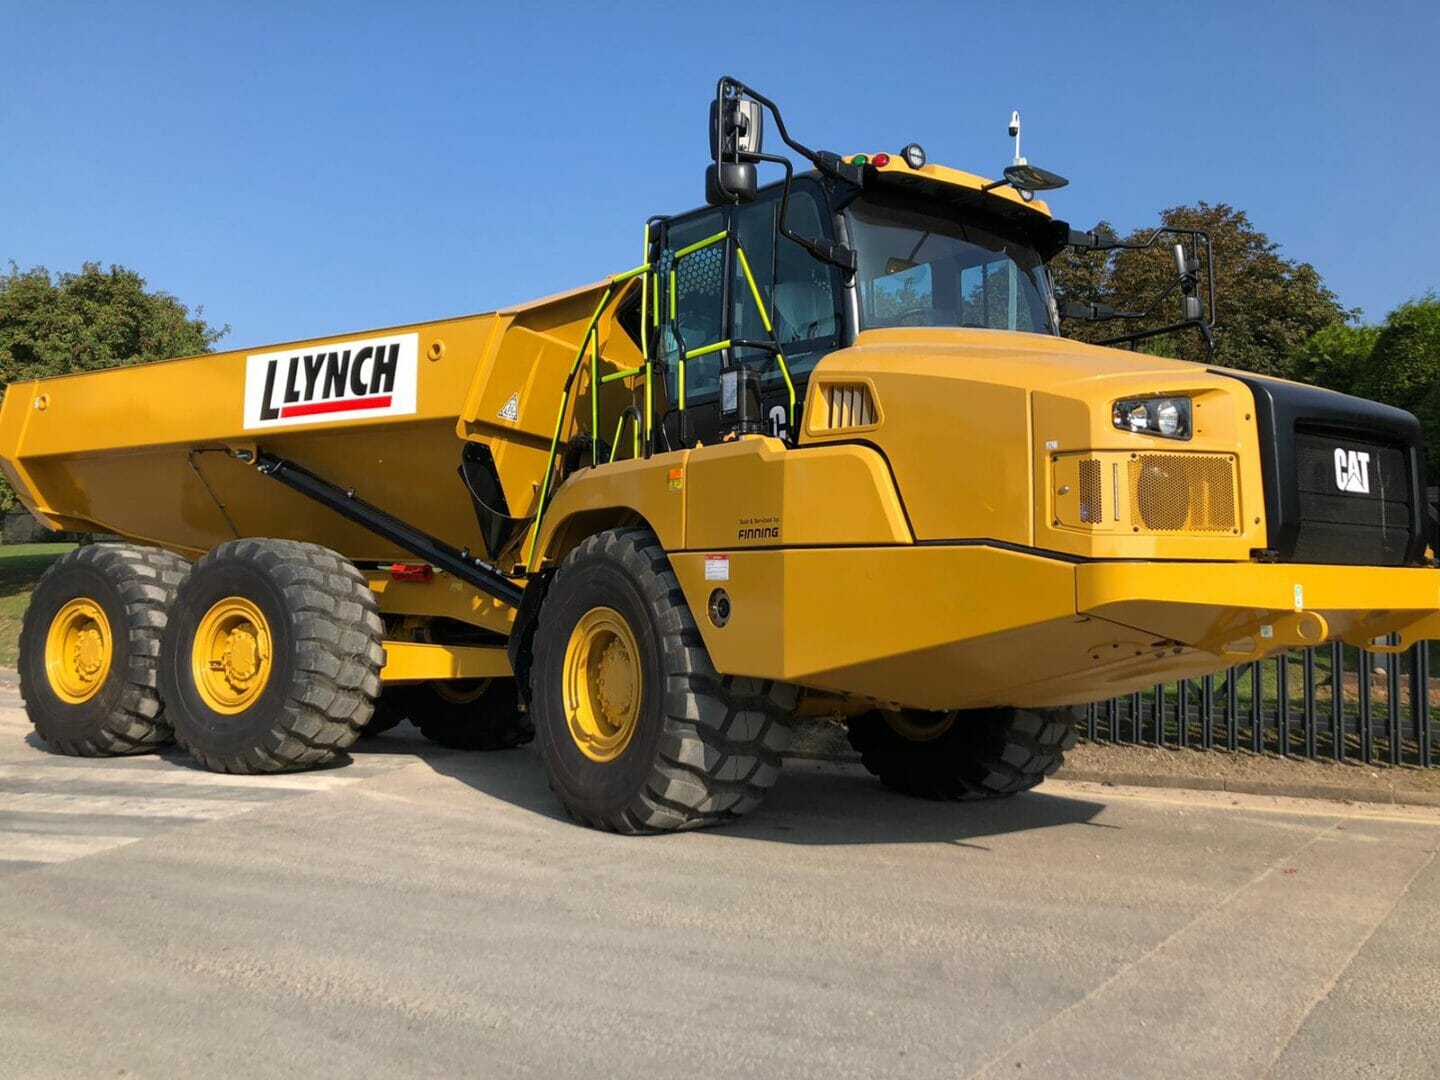 Lynch adds 34 Caterpillar® machines to its fleet ~ Finning delivers new machines including electric dozer and vibratory soil compactor